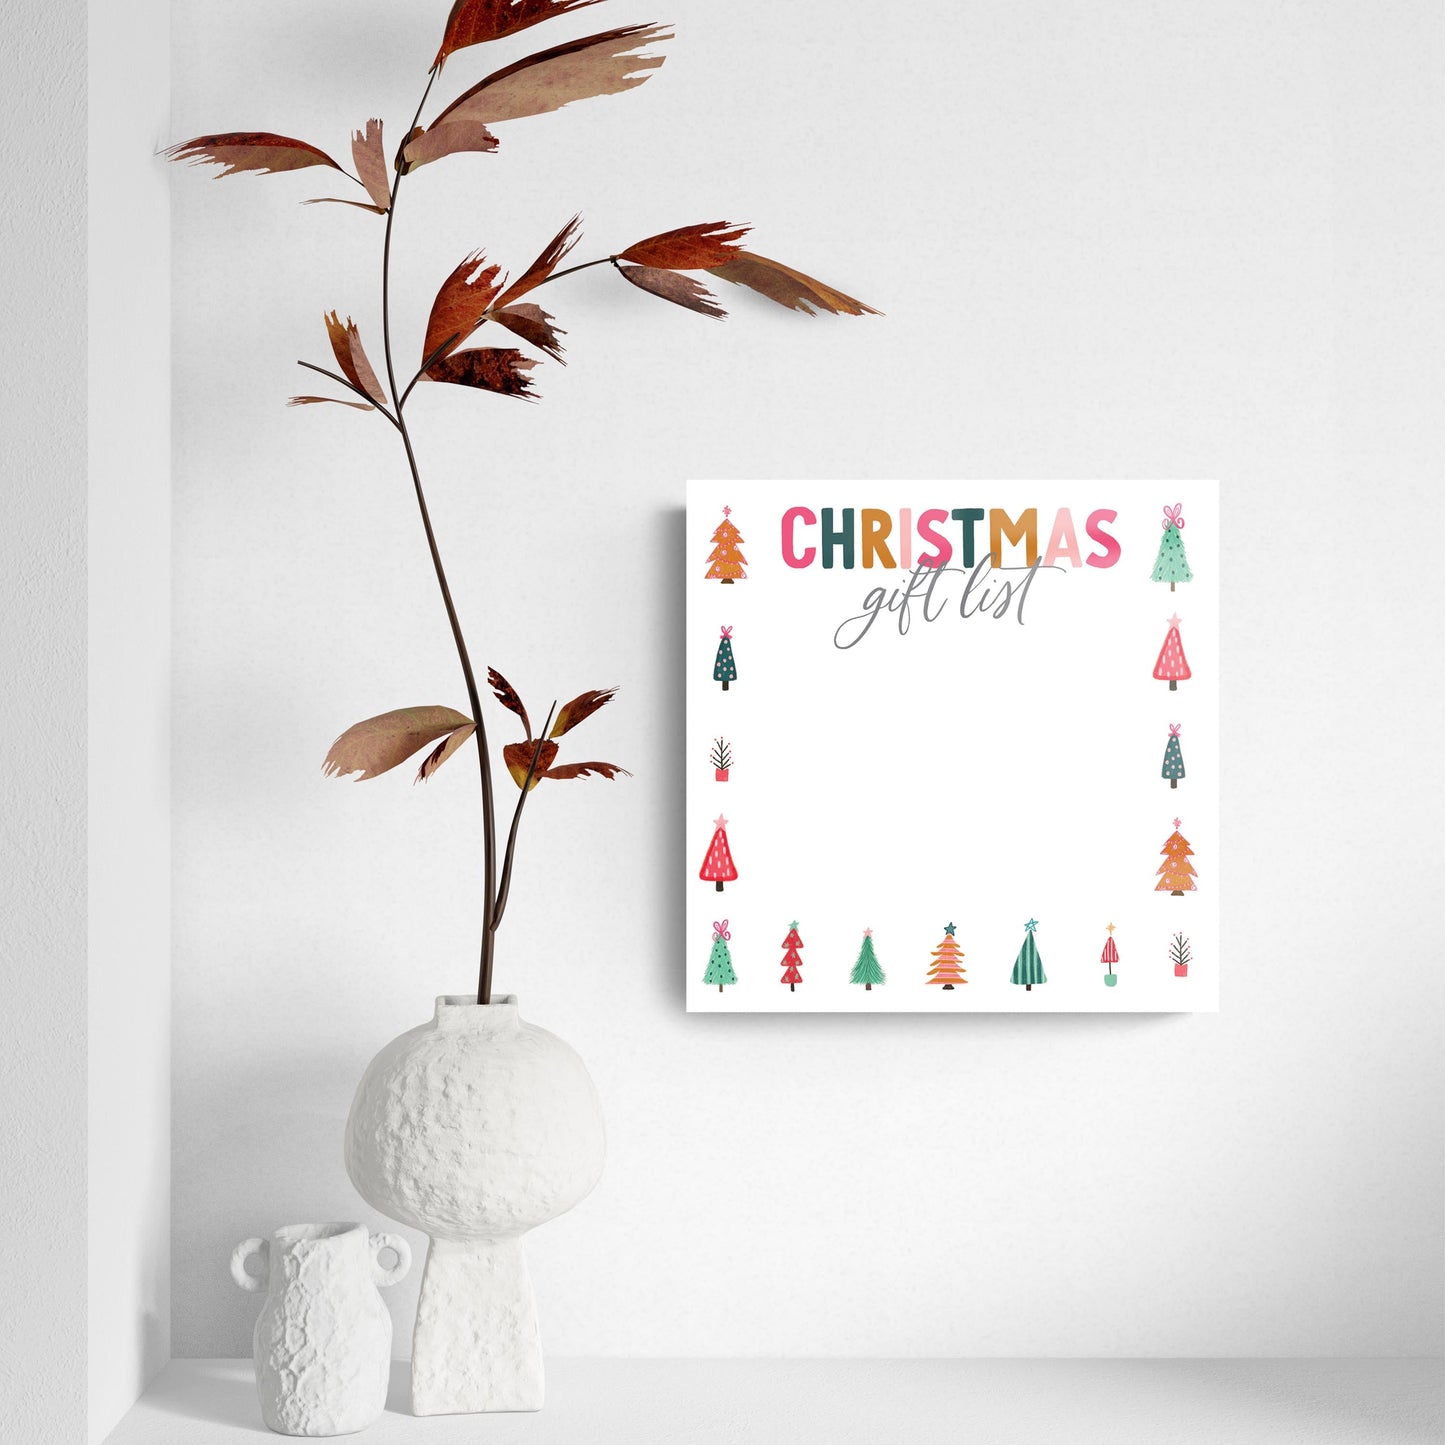 Clairmont & Co Whimsy Bright Christmas Gift List | 8x8